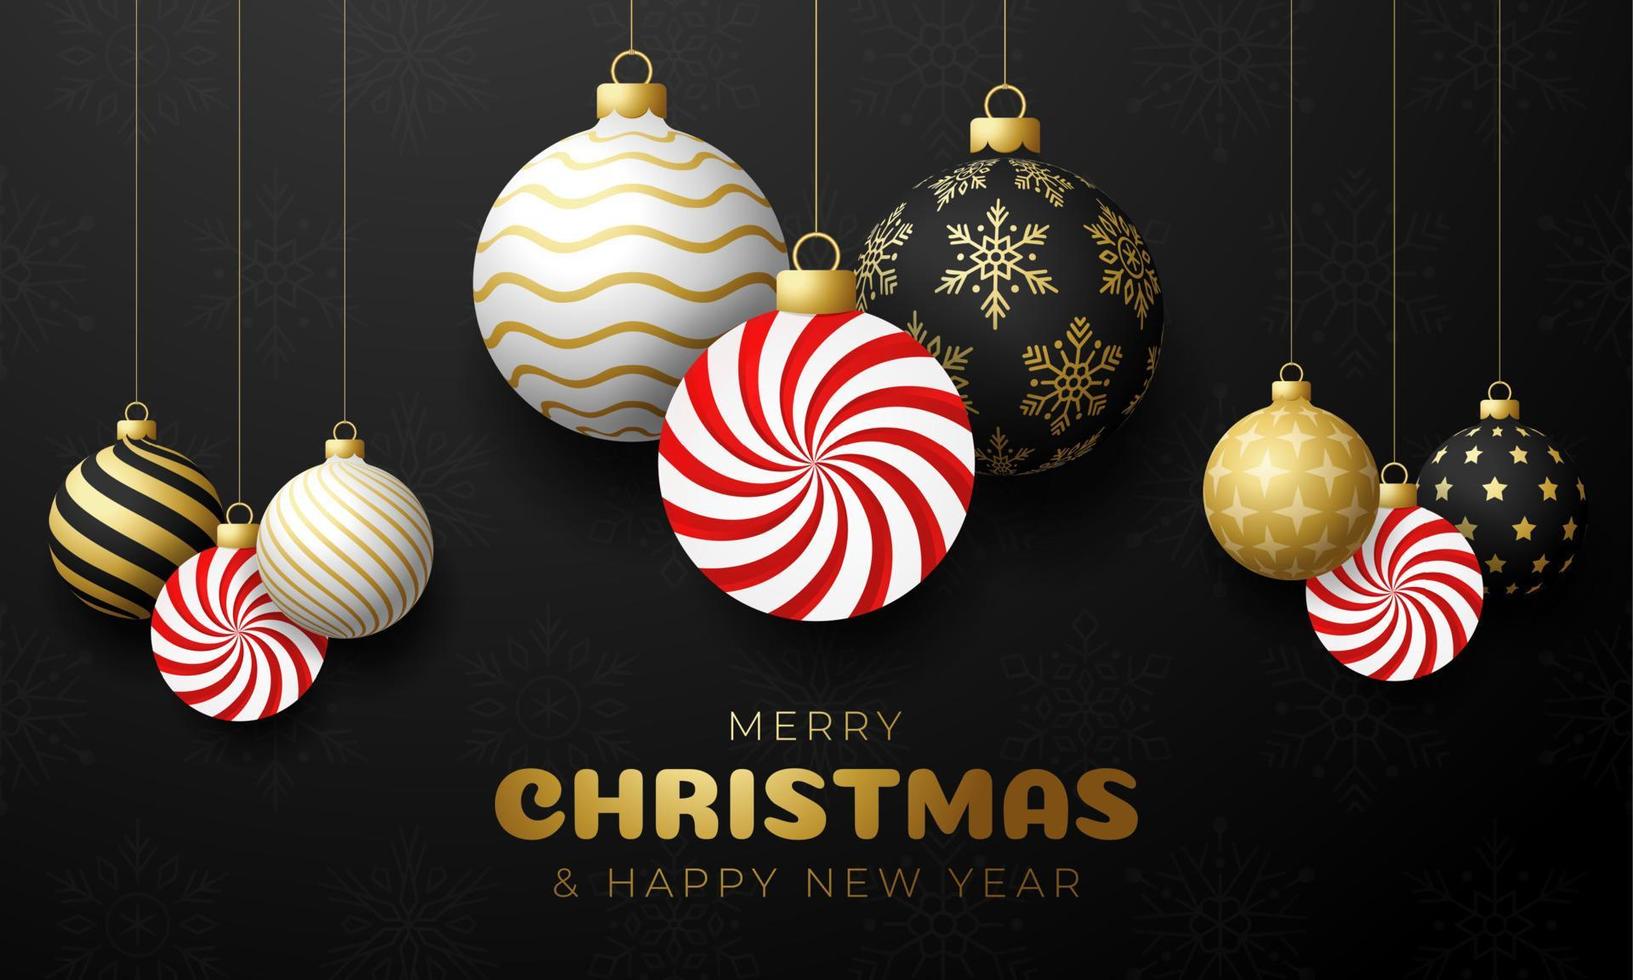 Candy Christmas card. Merry Christmas sweet greeting card. Hang on a thread mint candy lollipop ball as a xmas ball and golden bauble on black horizontal background. Vector illustration.